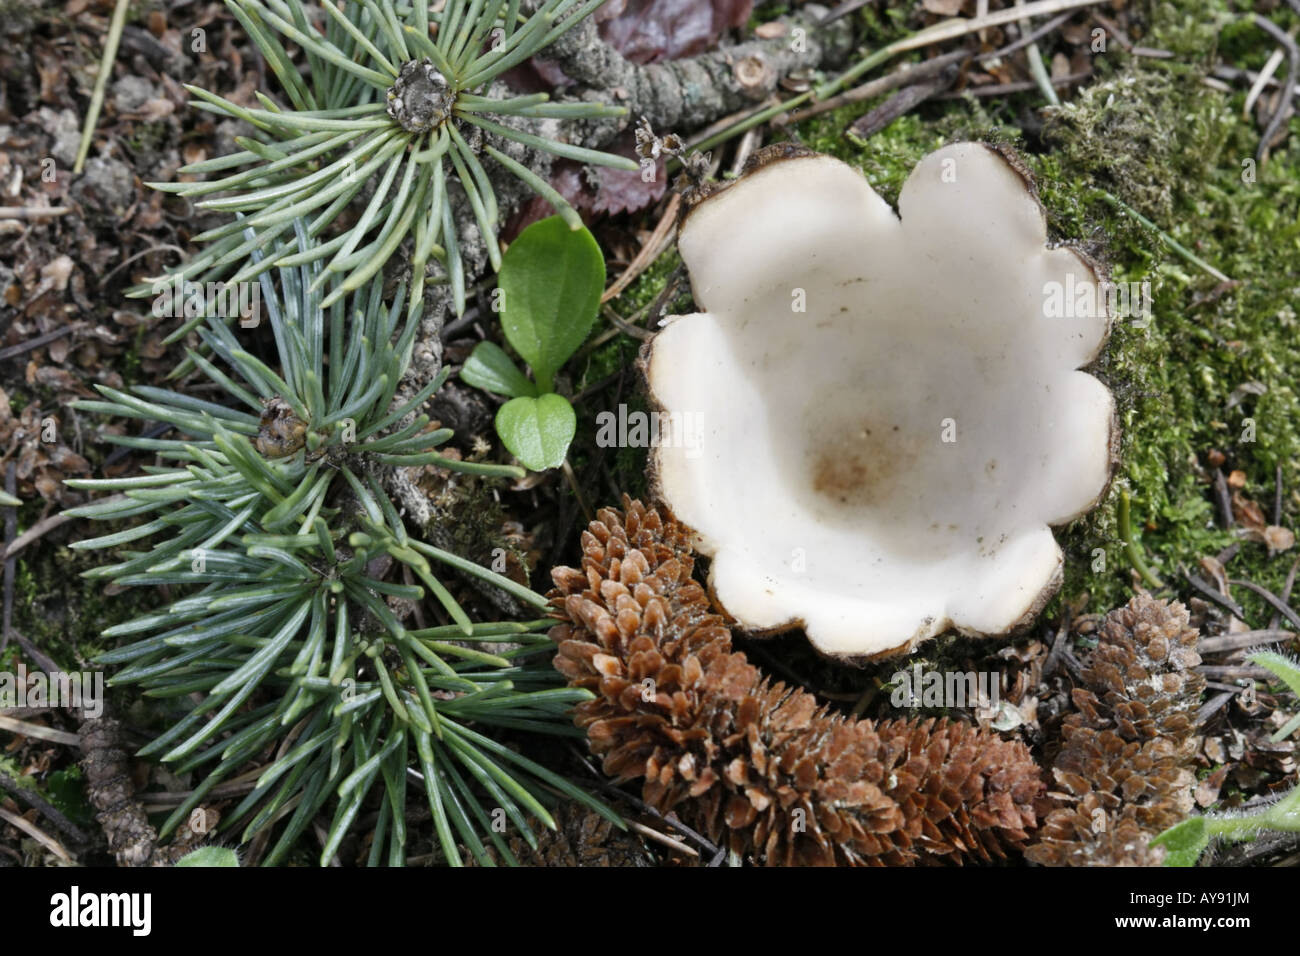 Cedar cup fungi, geopora sumneriana, with twig and male flower from the cedar tree it is growing under. Stock Photo